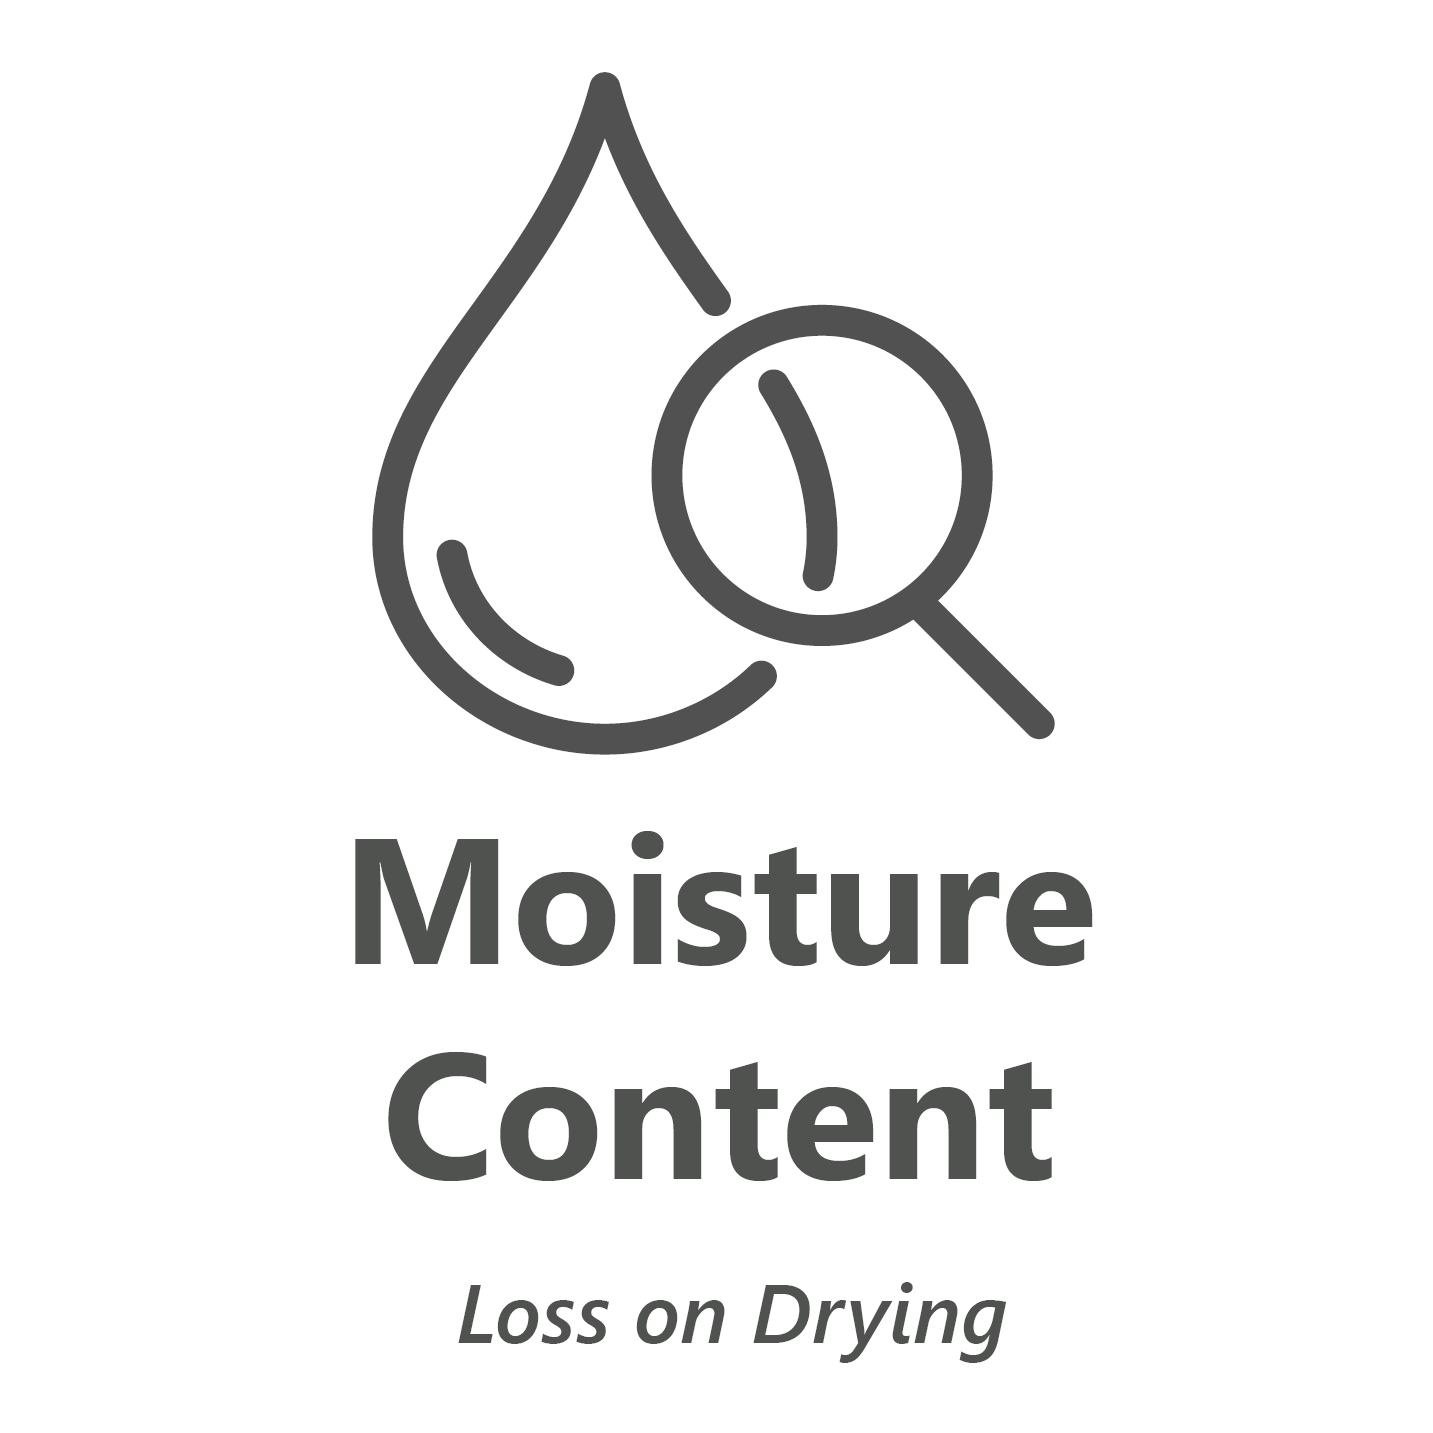 Web store icon for Moisture Content in cannabis material test.